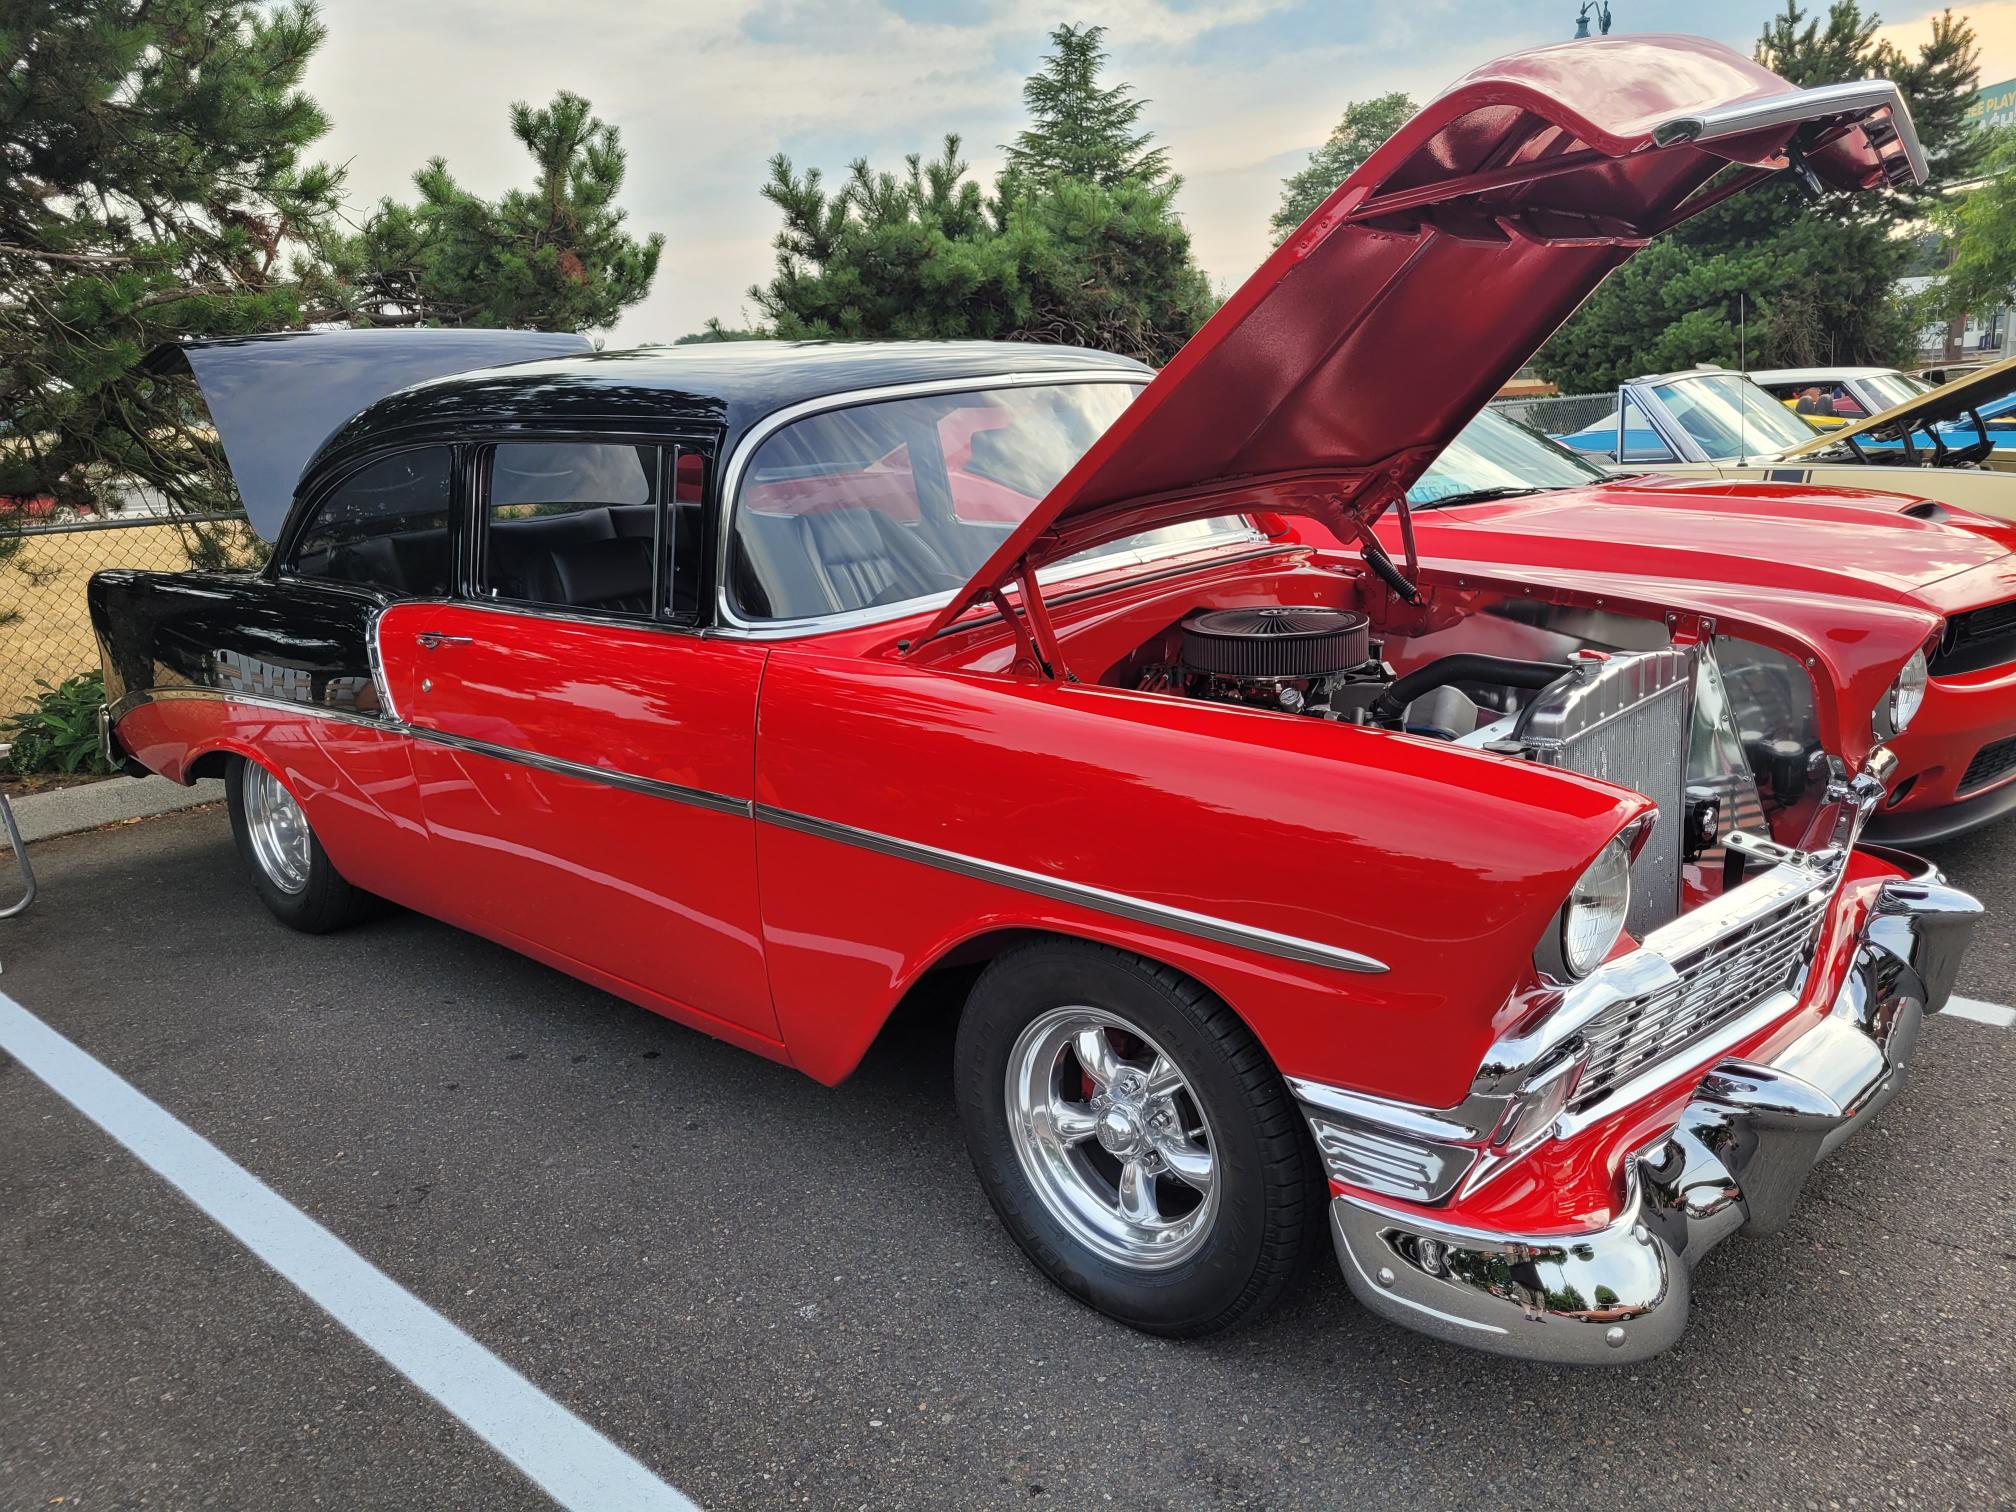 Show Off Your Hot Rod and Check Out Other Classic Vehicles at the Flaming Pig BBQ Rides N’ Rods Car and Motorcycle Show